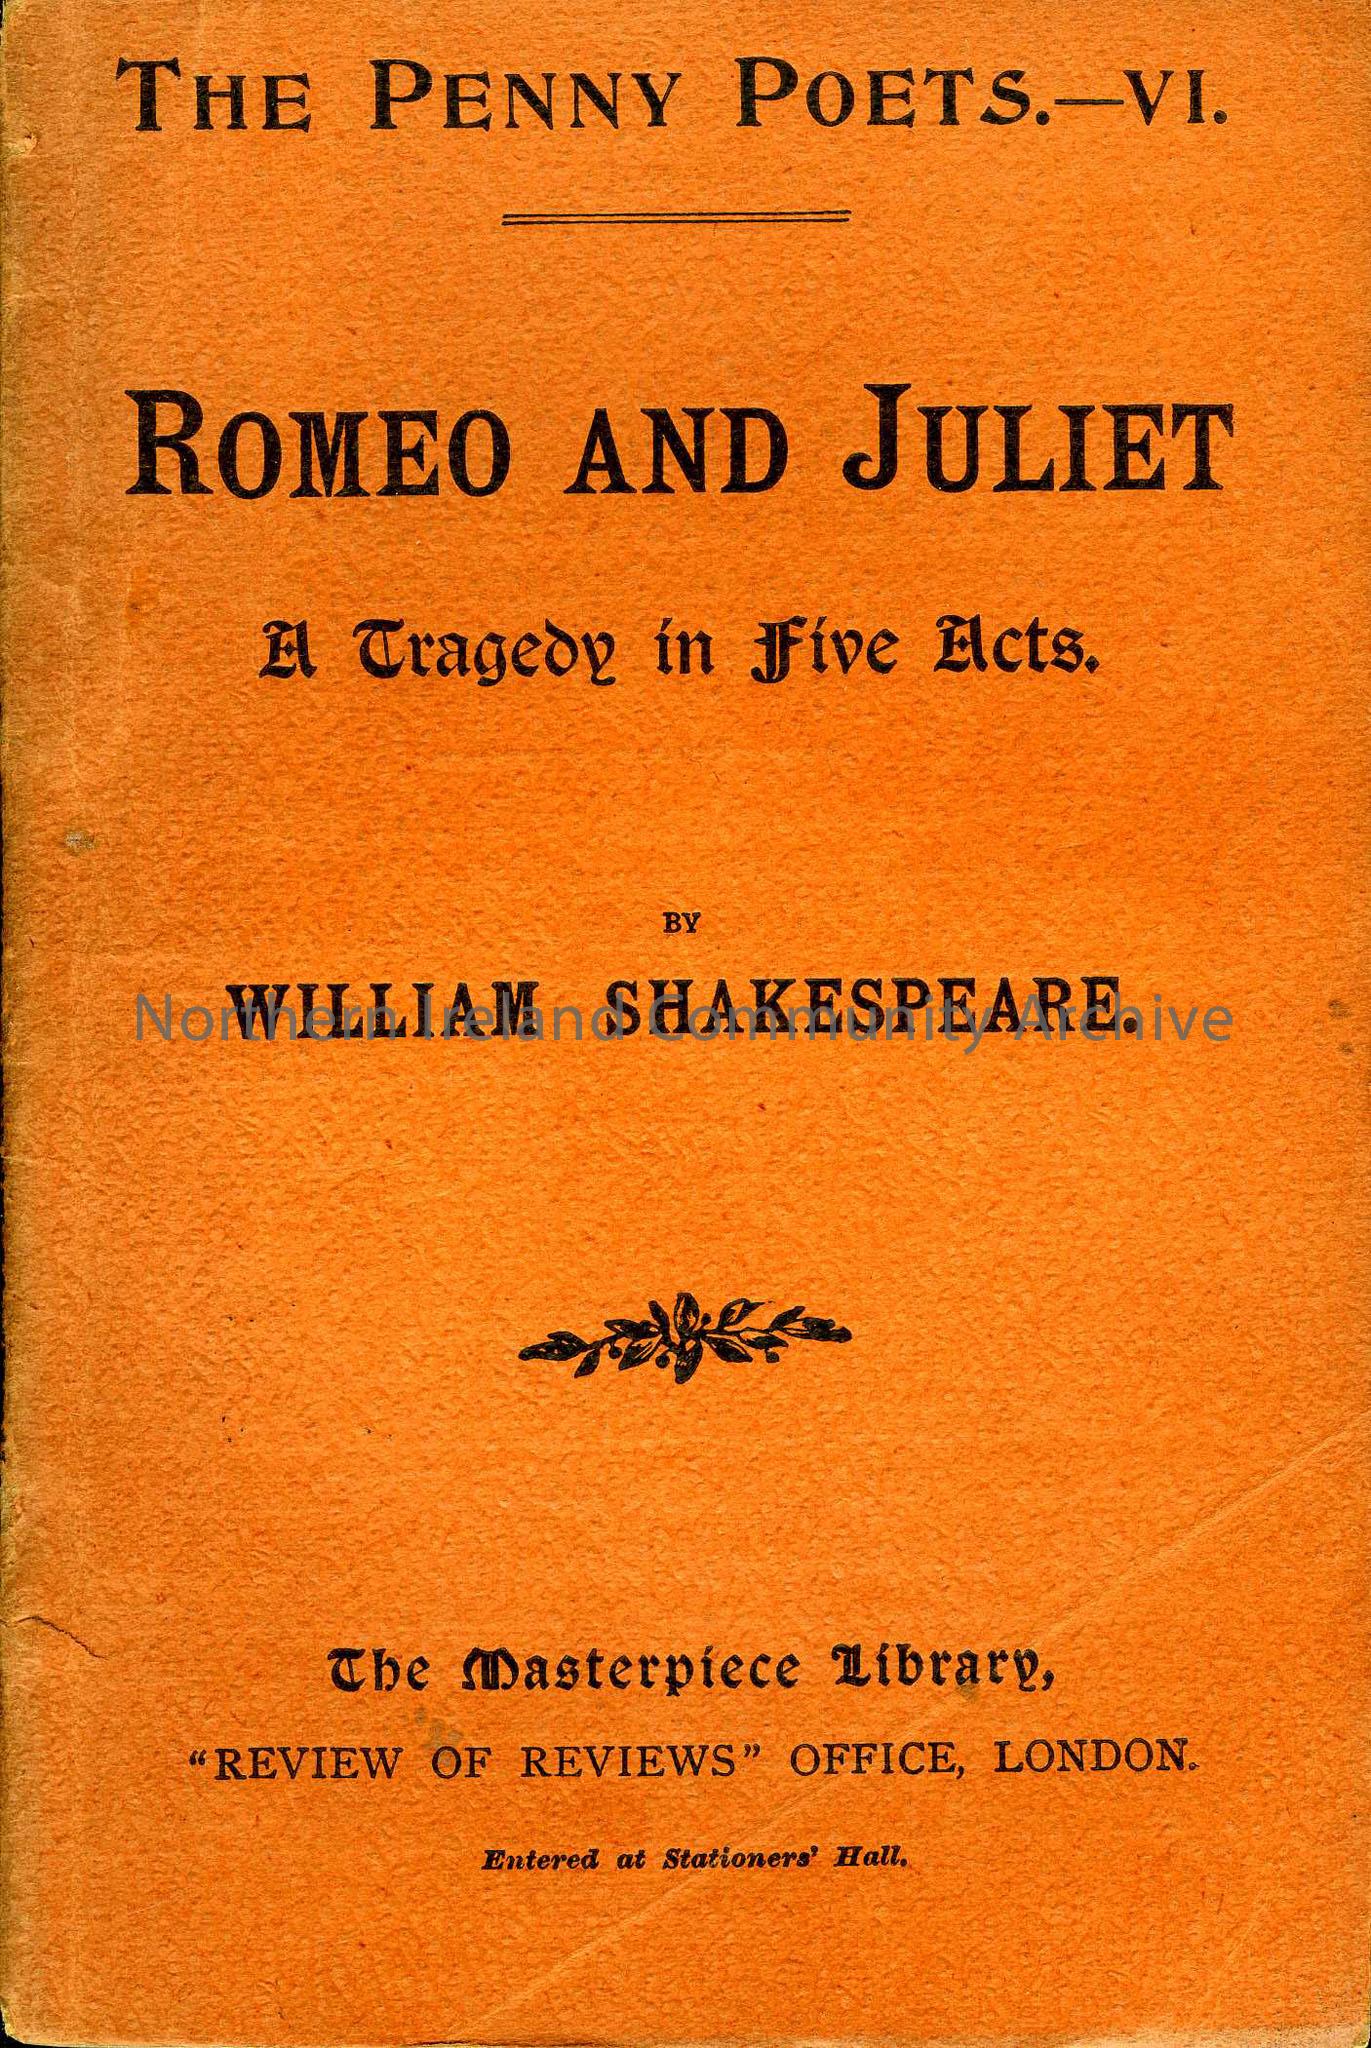 Romeo and Juliet – A Tragedy in Five Acts by William Shakespeare